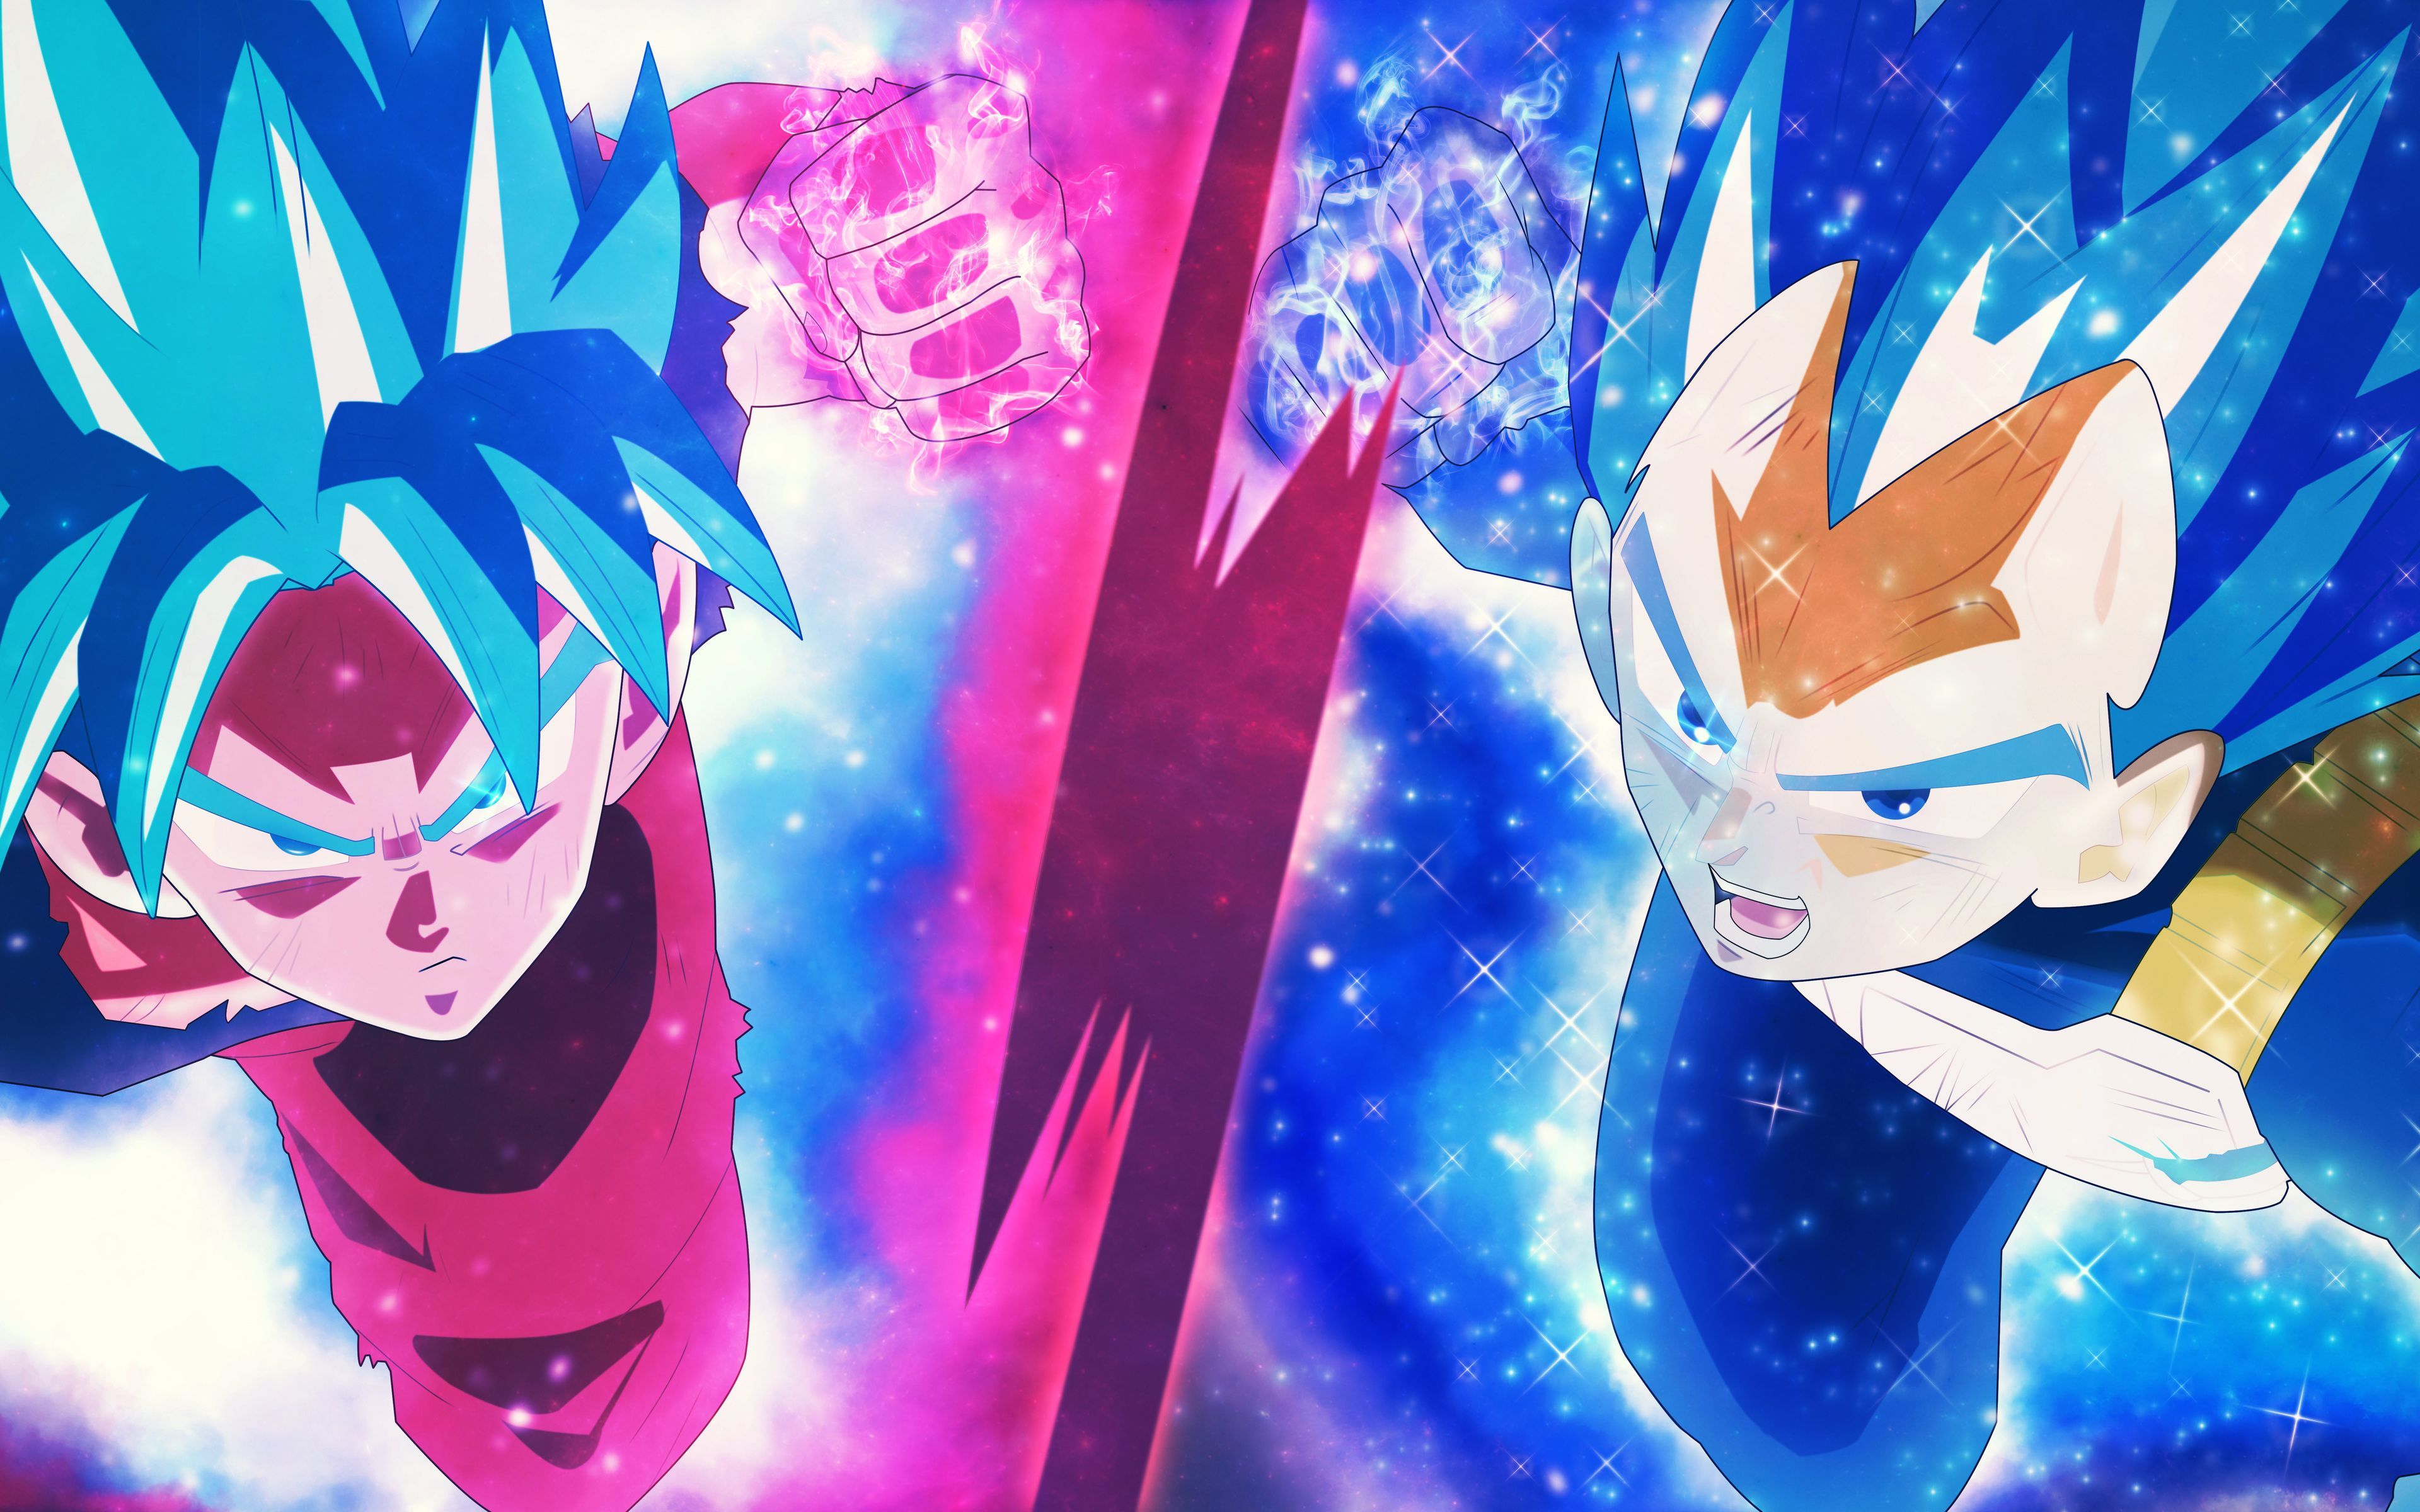 Download wallpapers Goku vs Vegeta, 4k, Dragon Ball, DBS, Goku, Vegeta, Dragon Ball Super, Son Goku for desktop with resolution 3840x2400. High Quality HD pictures wallpapers